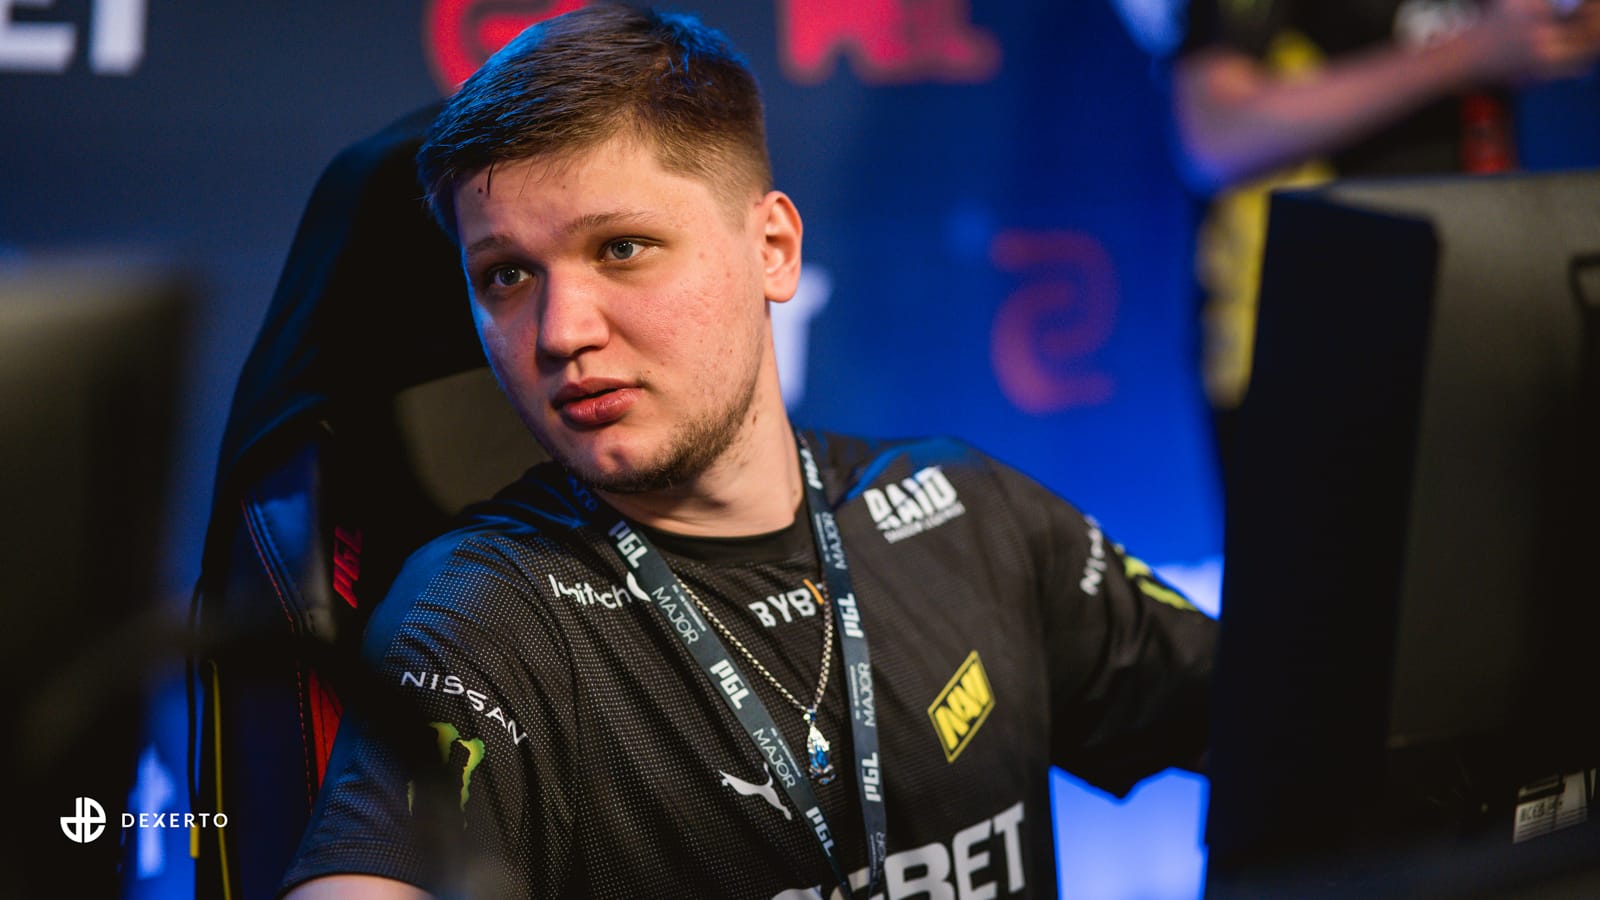 CSGO star s1mple says he’d “destroy” if he joined NAVI’s Valorant staff – Egaxo